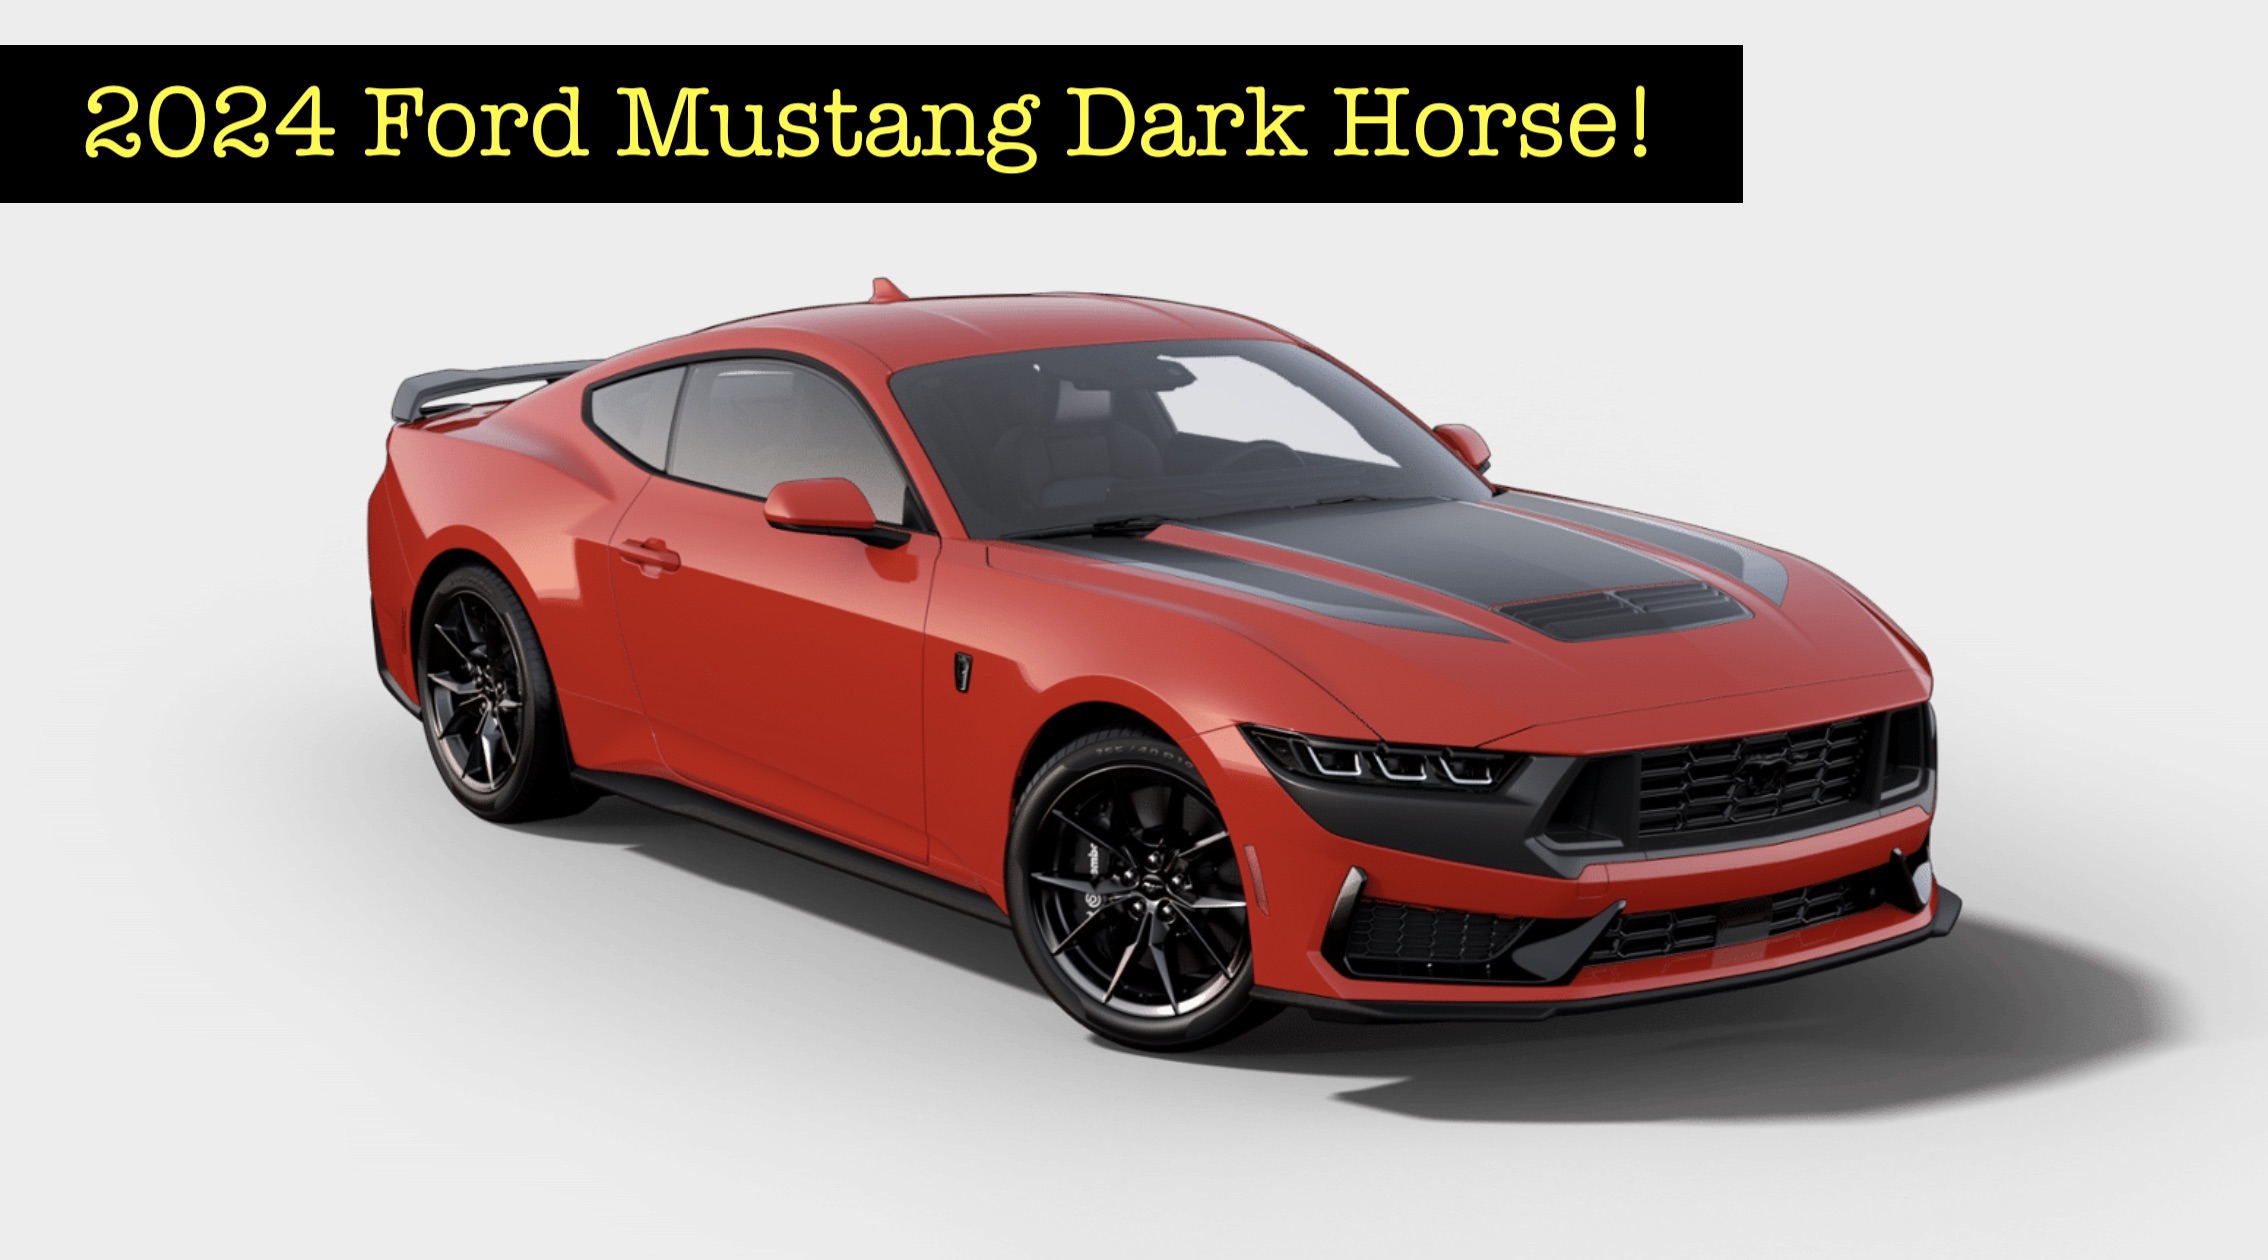 News 2024 Ford Mustang Online Configurator Is Live! Check Out This